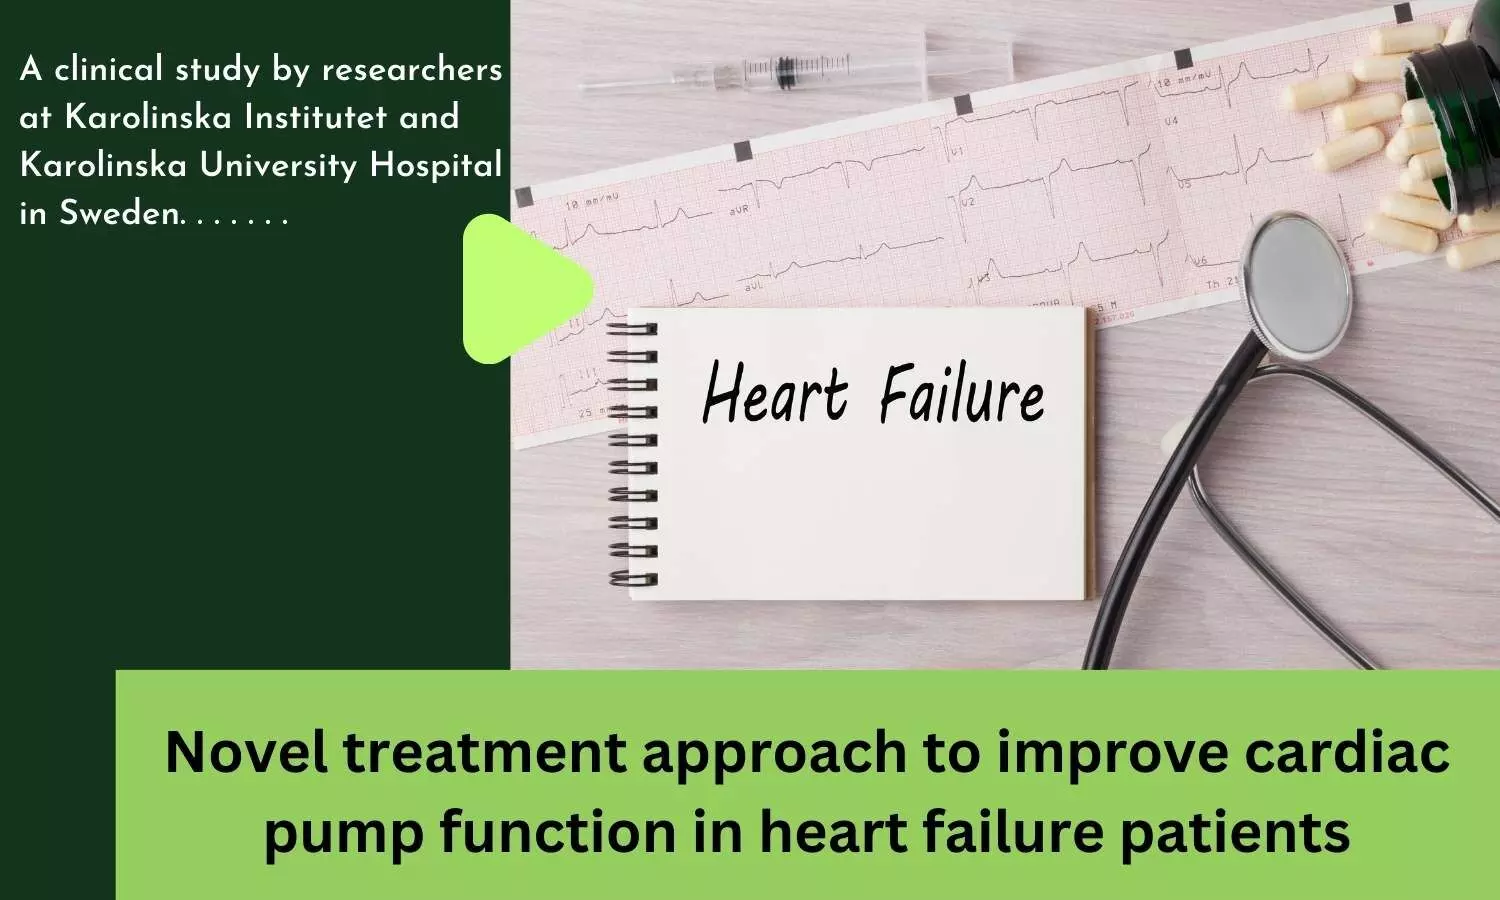 Novel treatment approach to improve cardiac pump function in heart failure patients